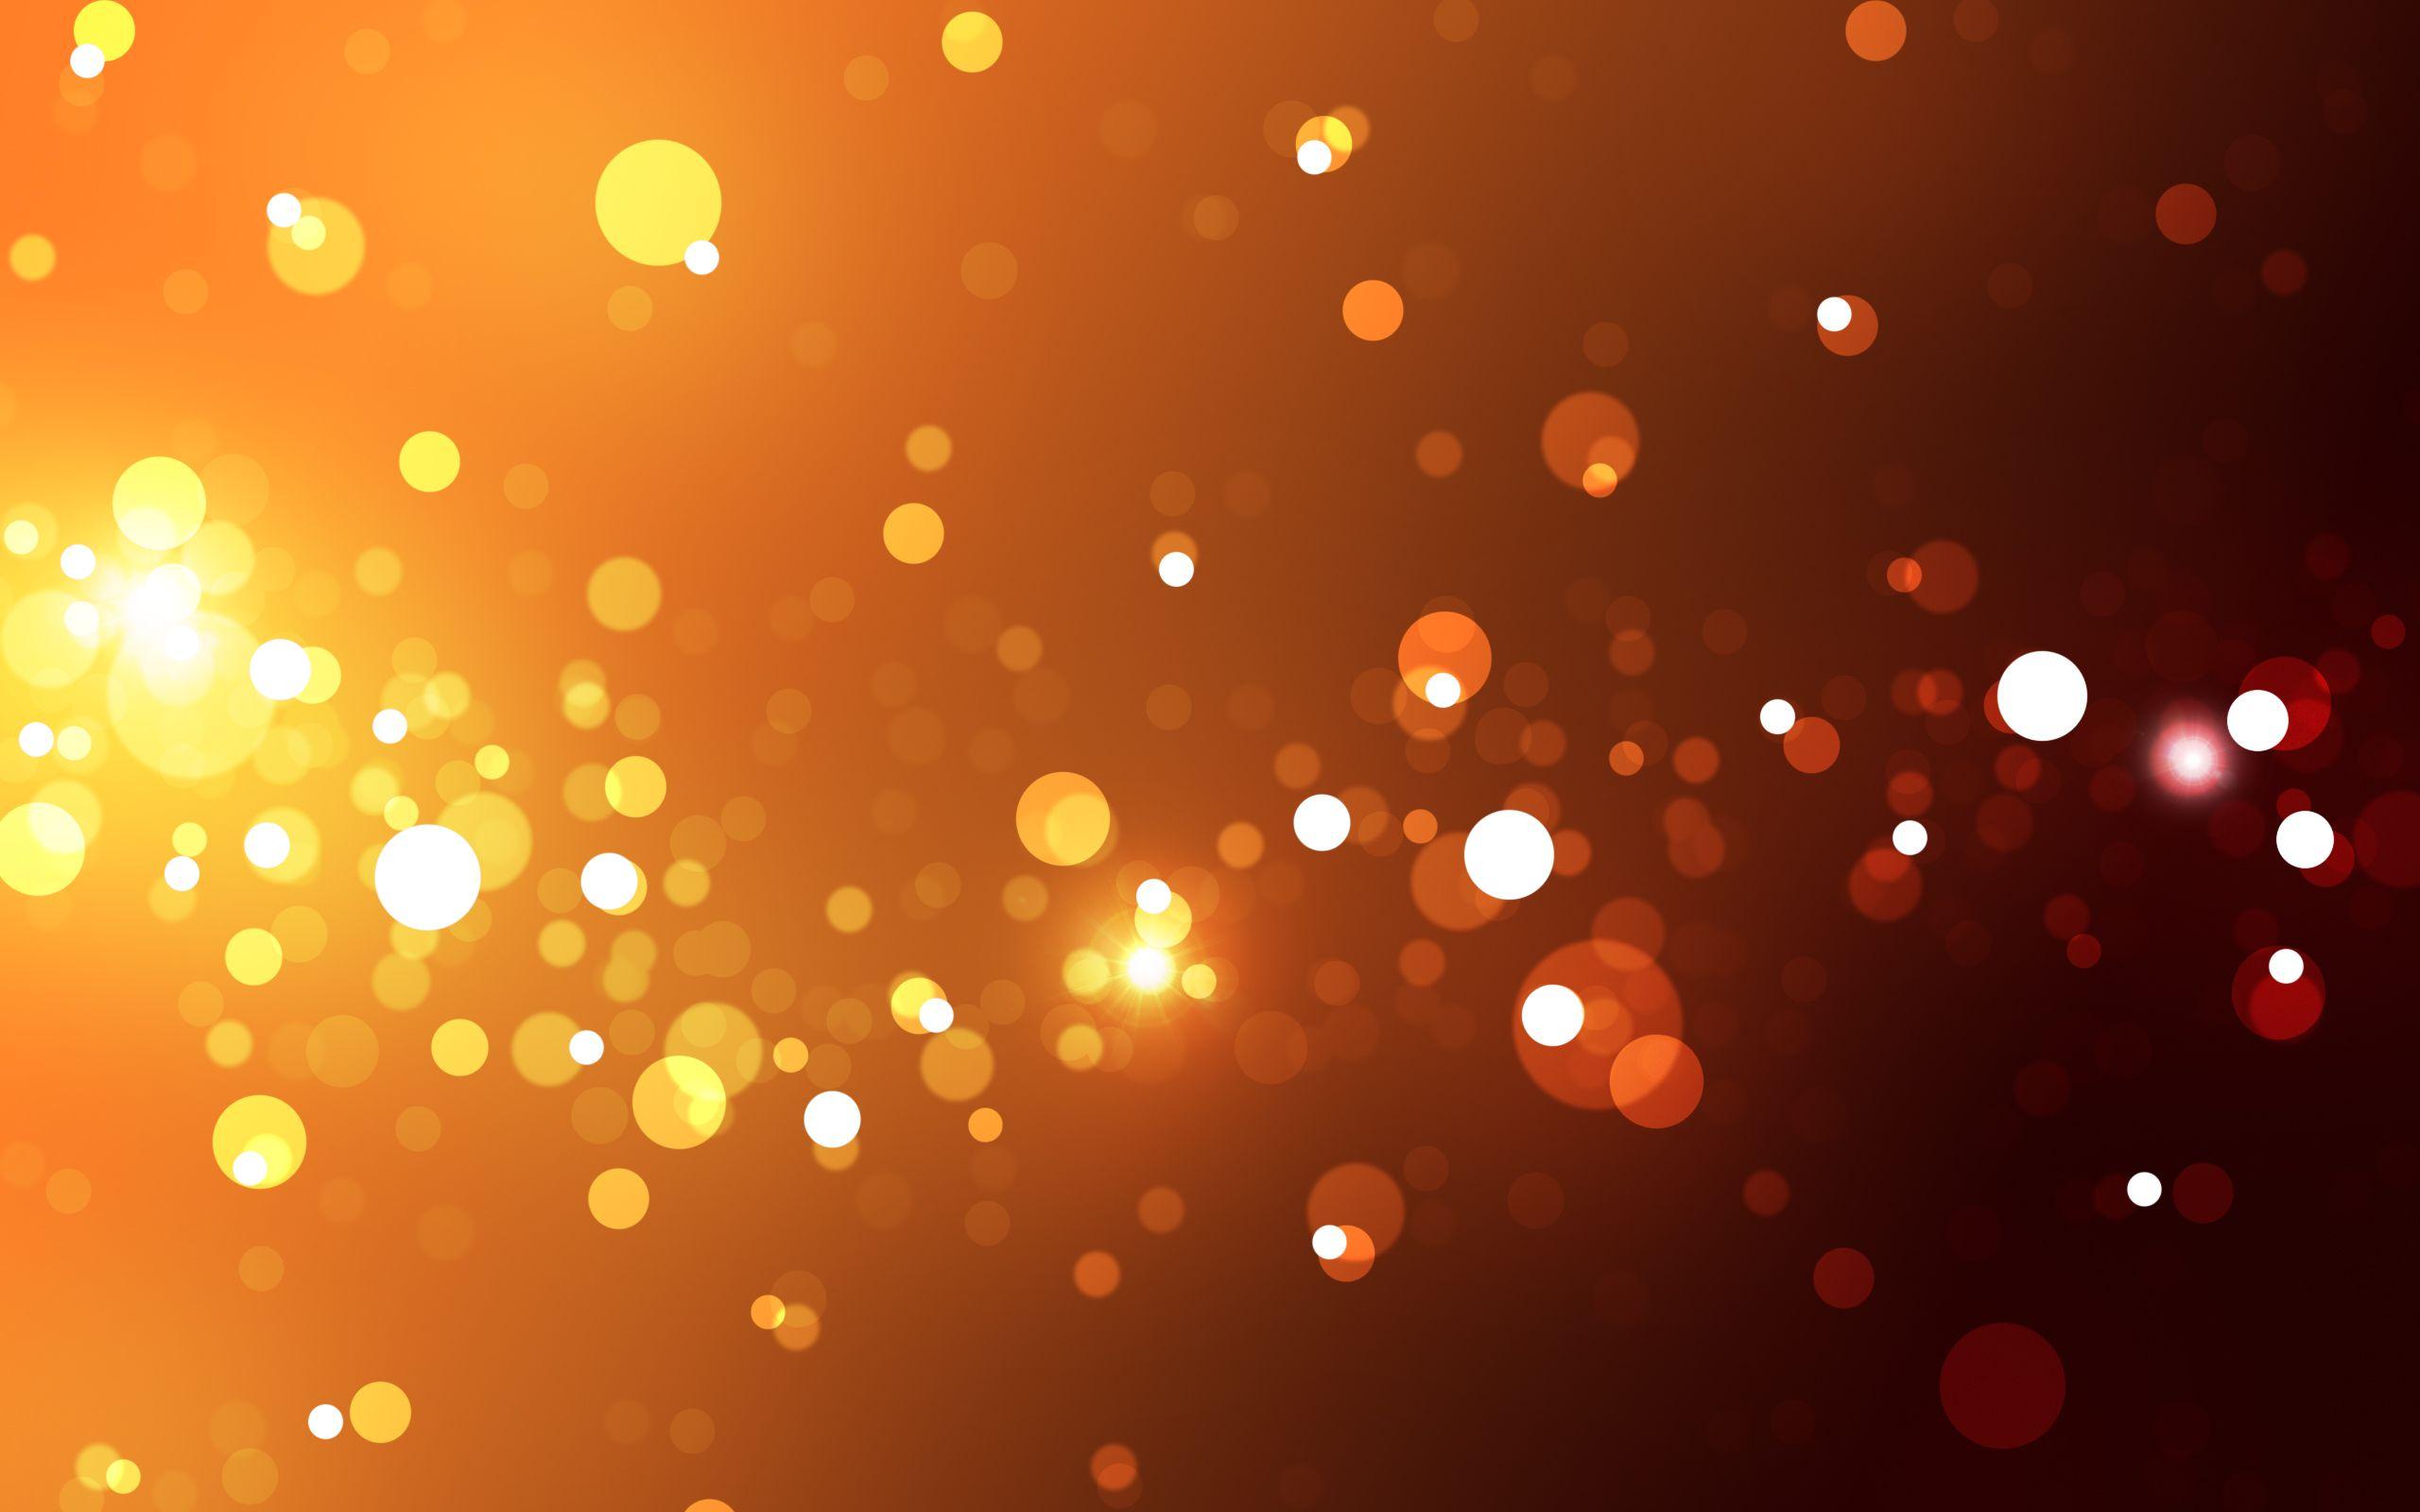 Daily Wallpaper: Warm Hues. I Like To Waste My Time